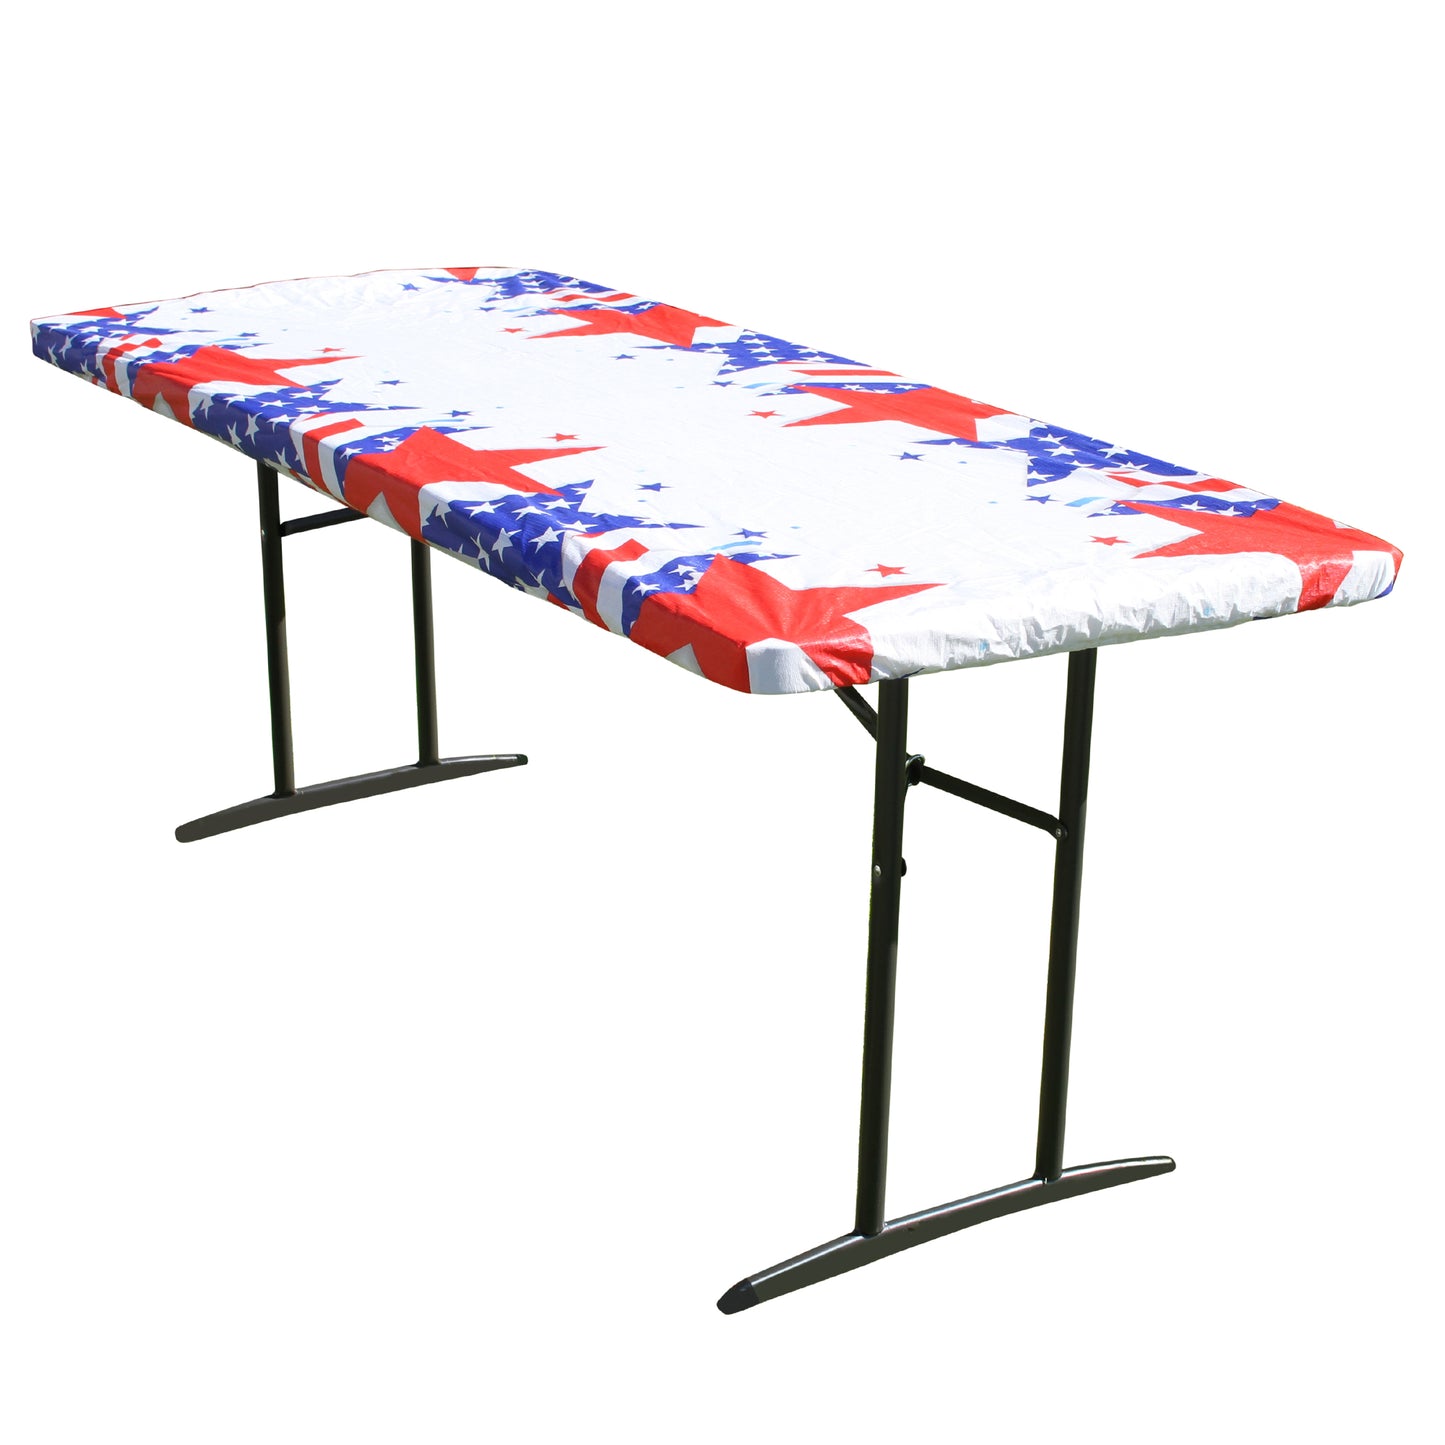 TableCloth PLUS 72" Patriotic Fitted PEVA Vinyl Tablecloth for 6' Folding Tables displayed adorning a folding table